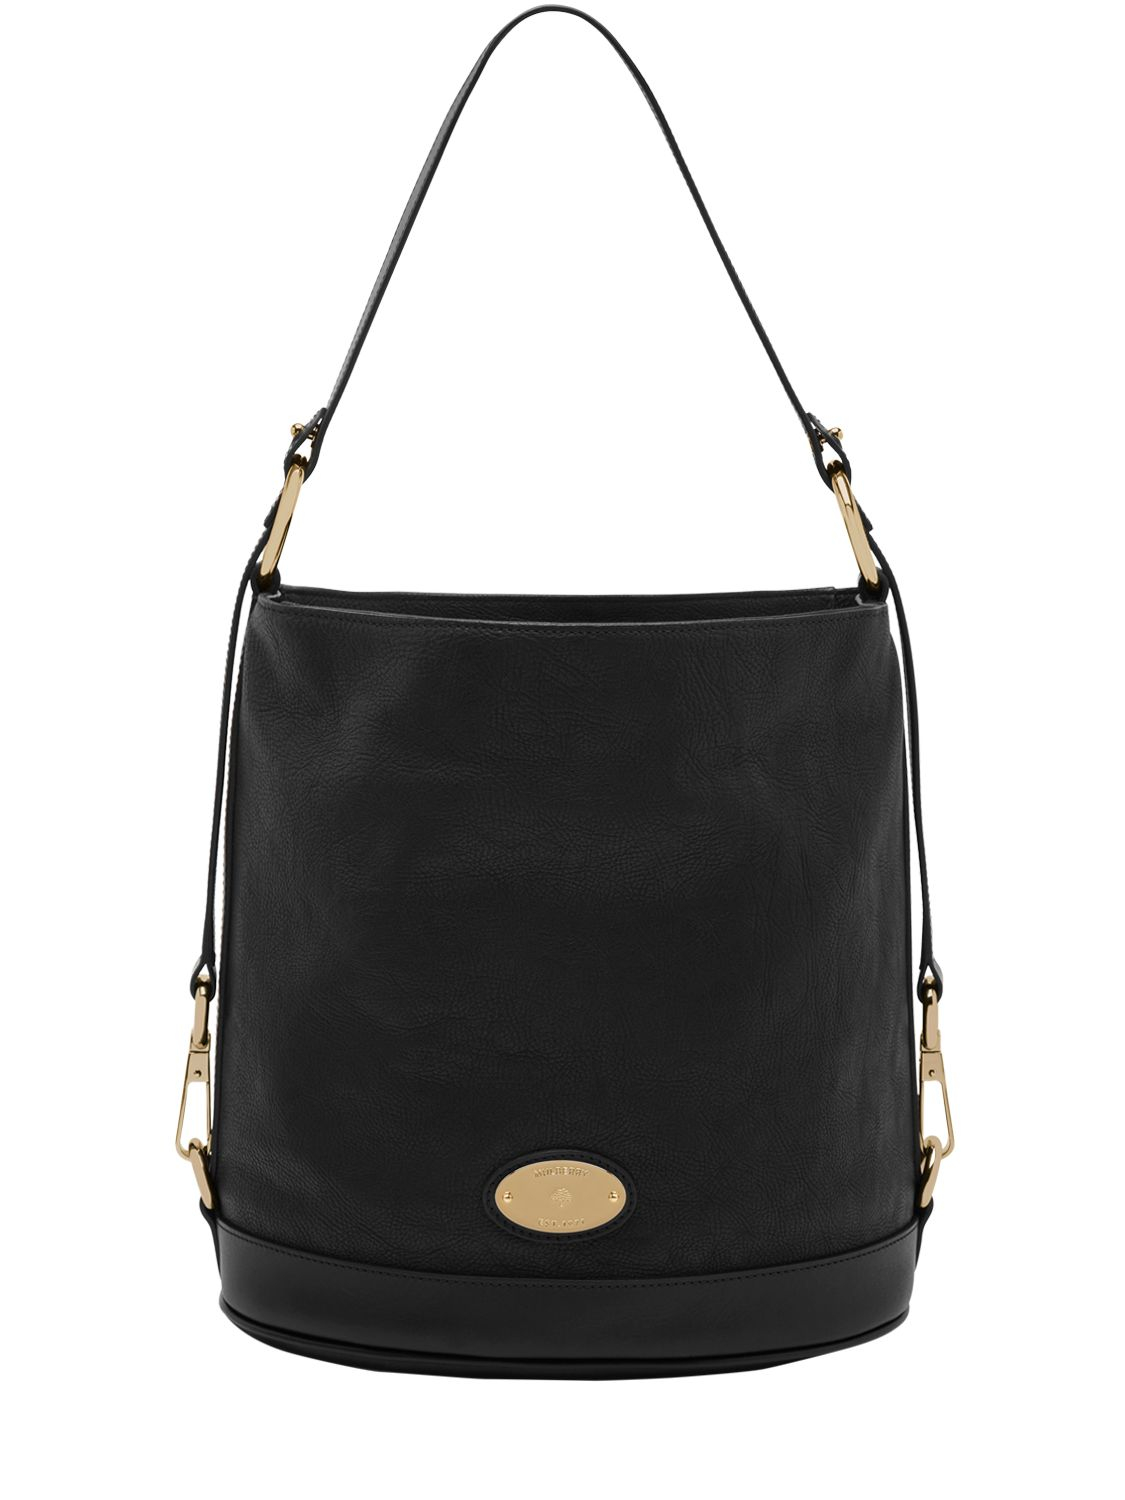 Mulberry Jamie Washed Leather Bucket Bag in Black | Lyst